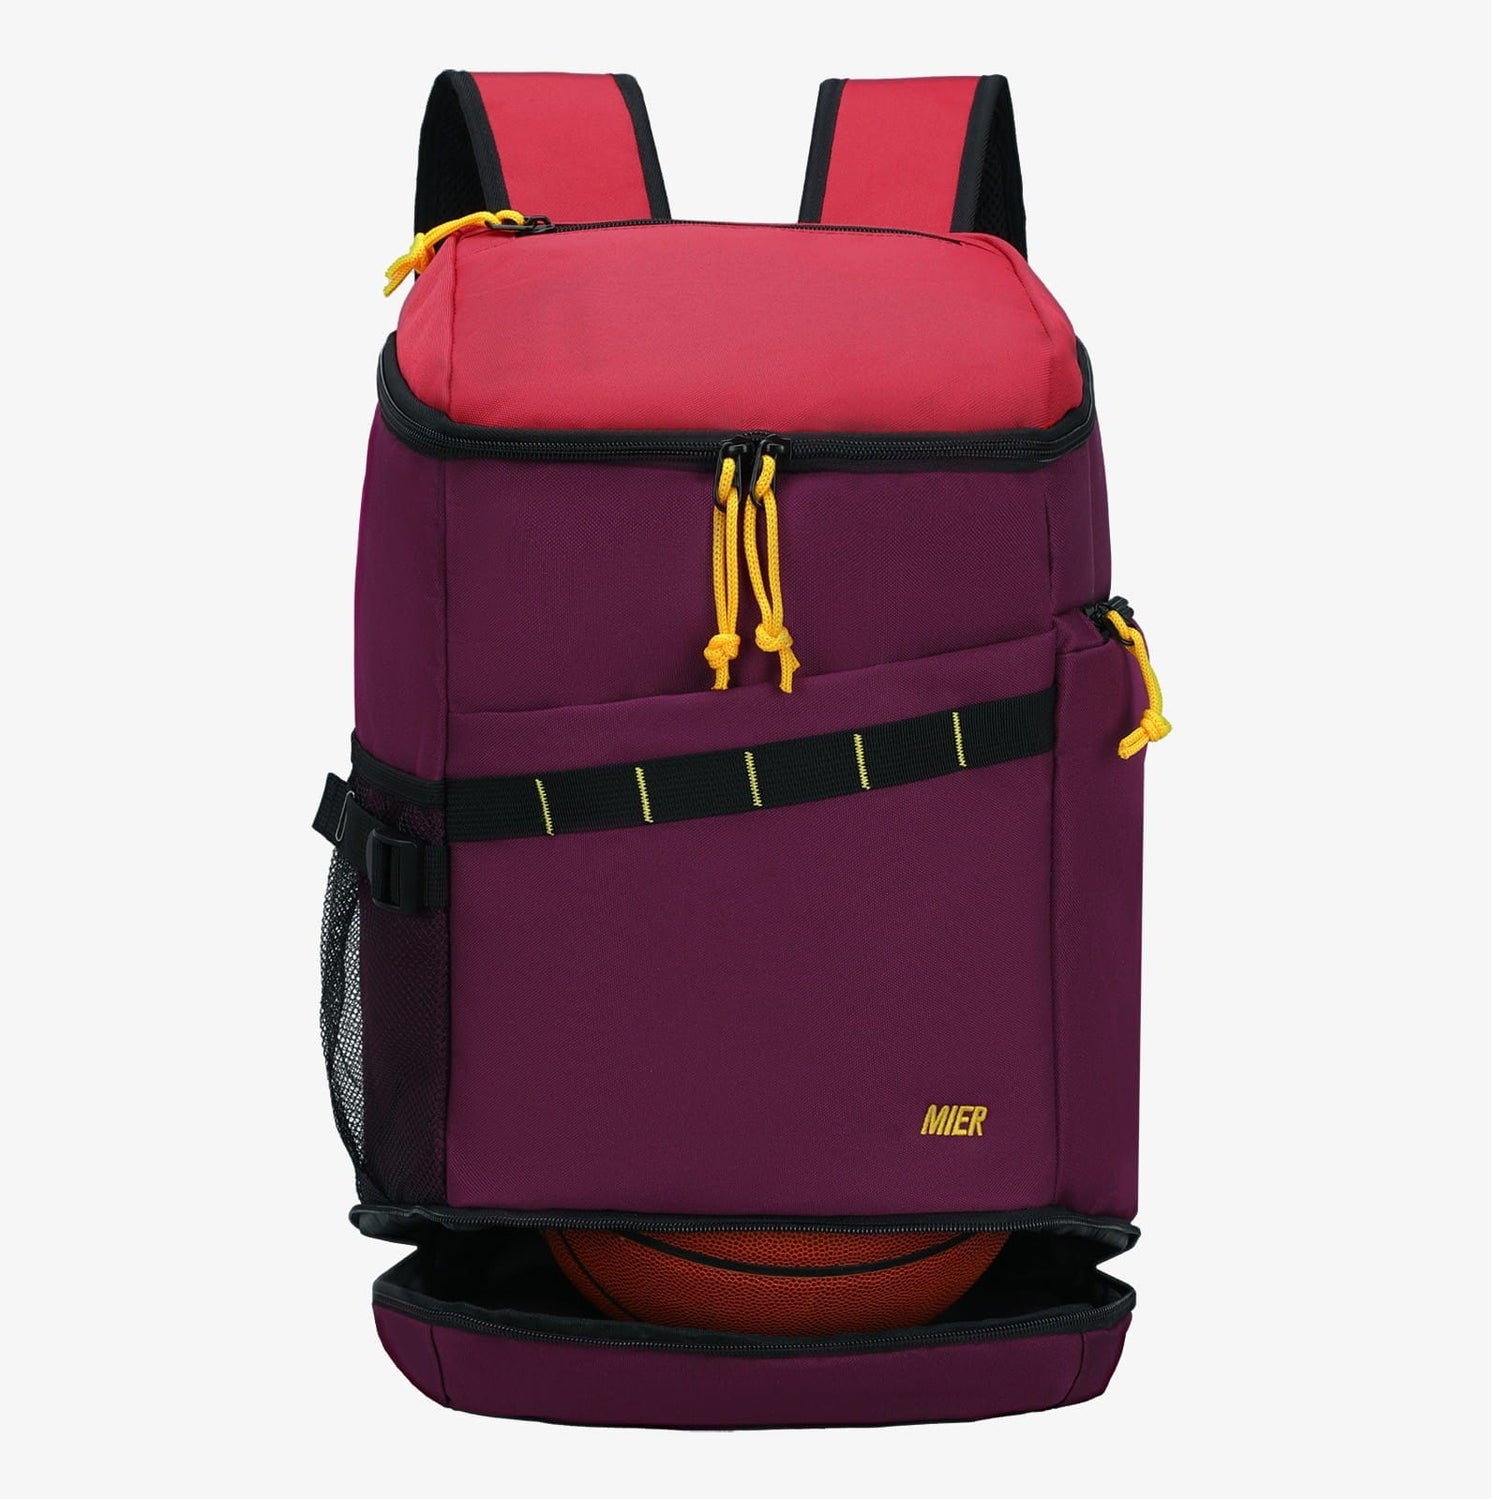 Basketball Backpack Soccer Bag with Shoes Compartment Backpack Bag Purple Red MIER